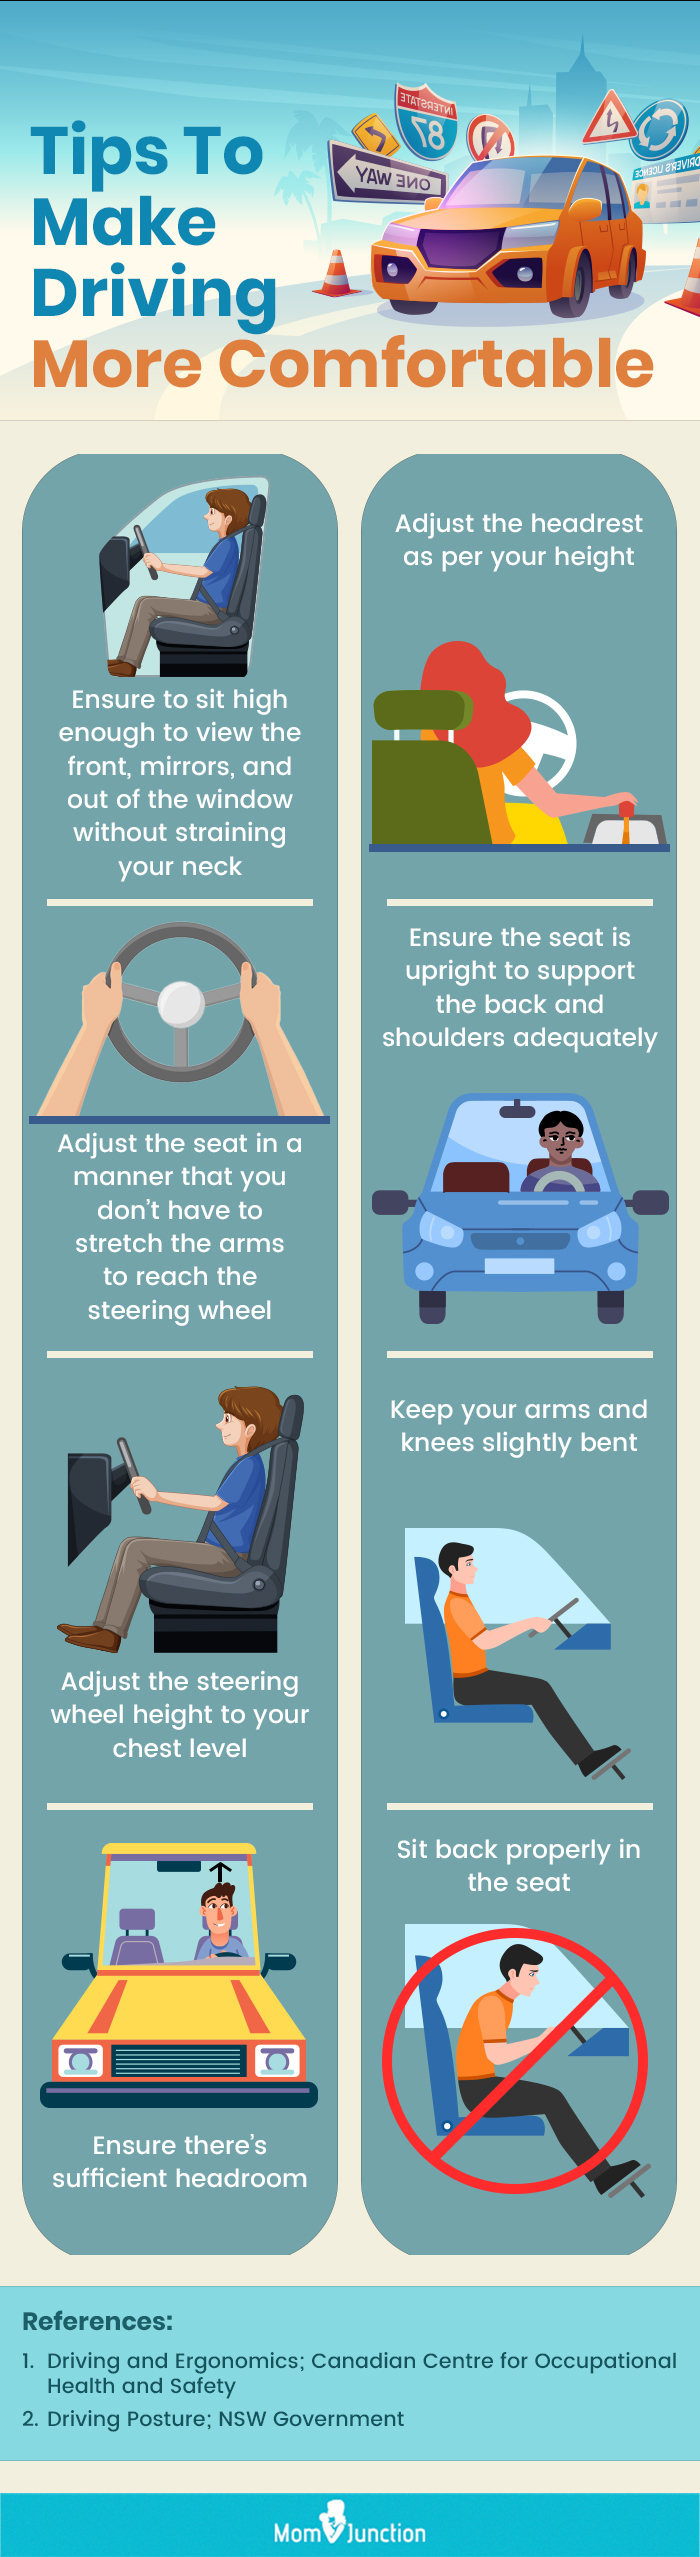 Tips To Make Driving More Comfortable (infographic)